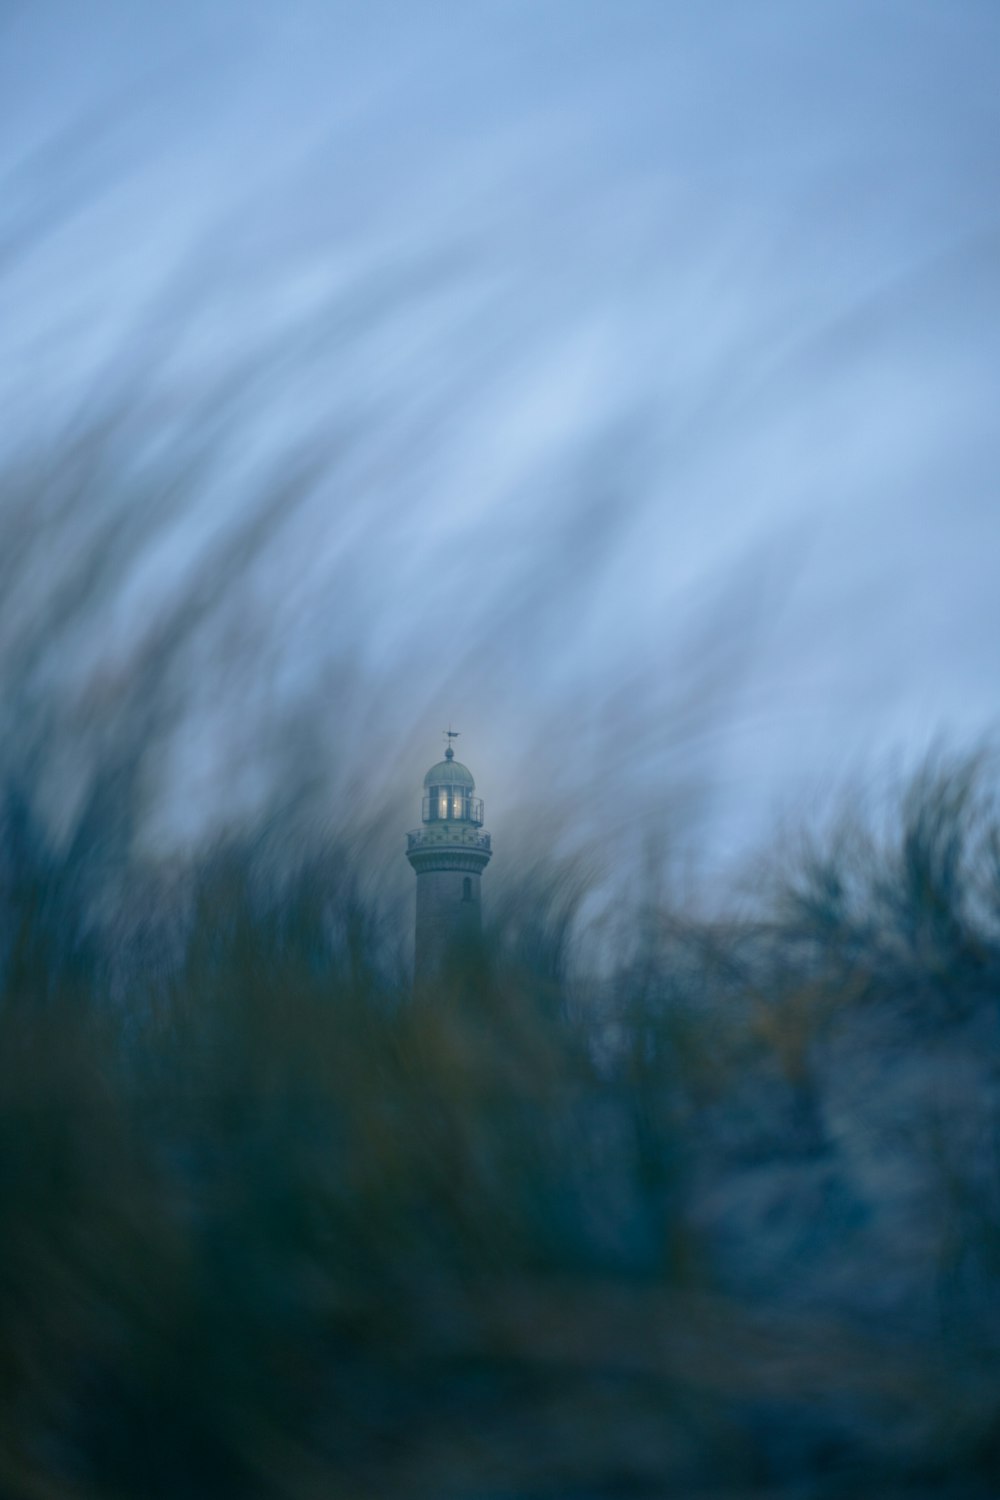 a blurry photo of a clock tower in the distance